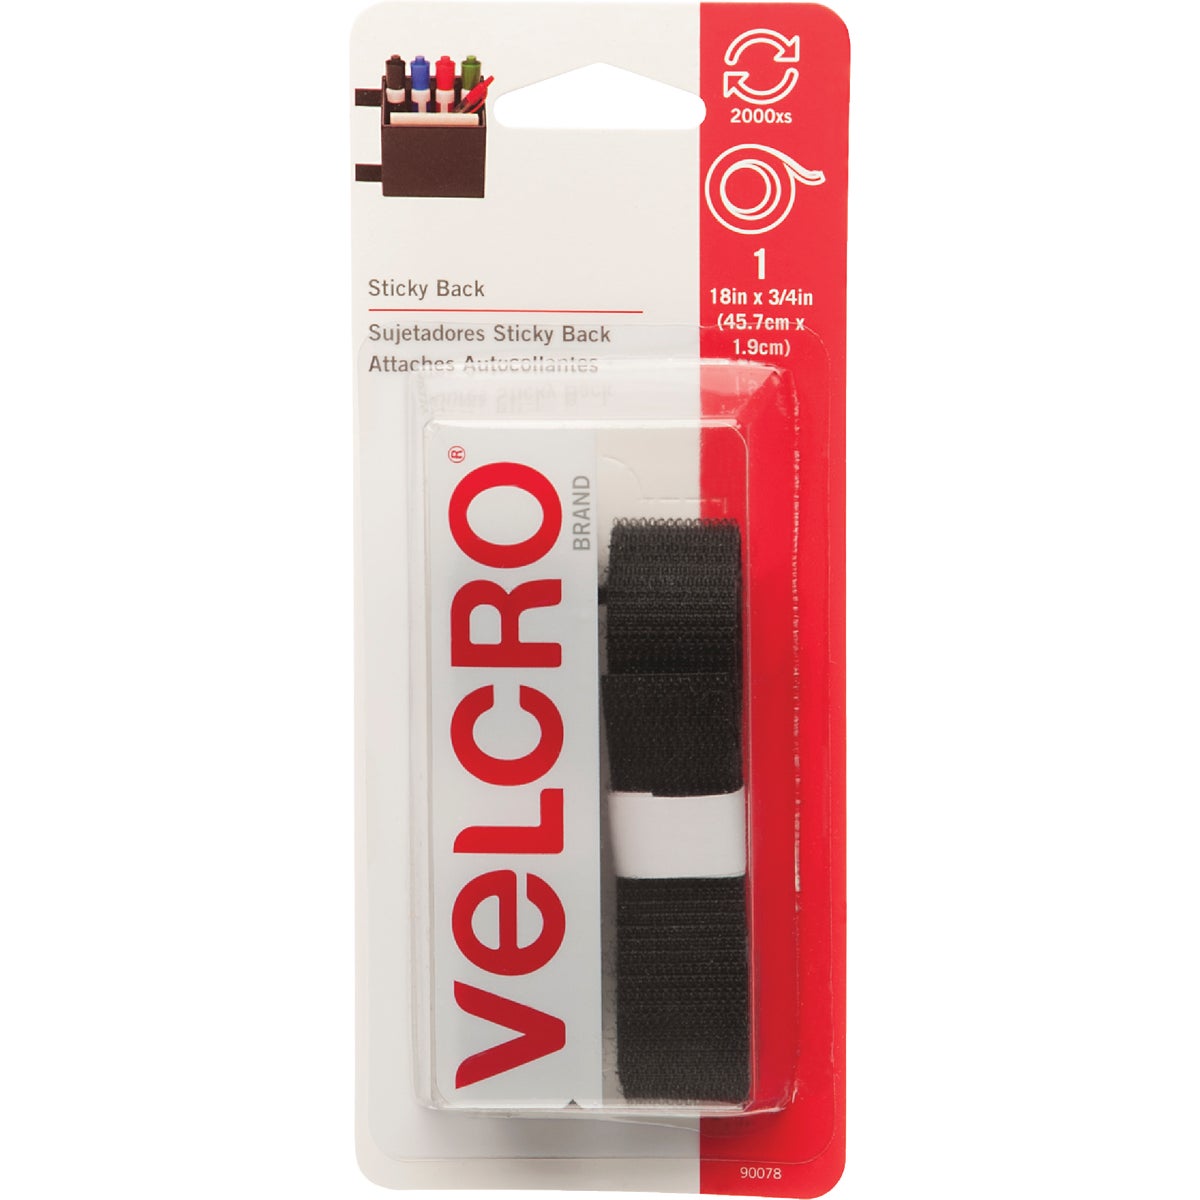 Item 644471, Adhesive backing VELCRO brand fasteners for smooth surface.